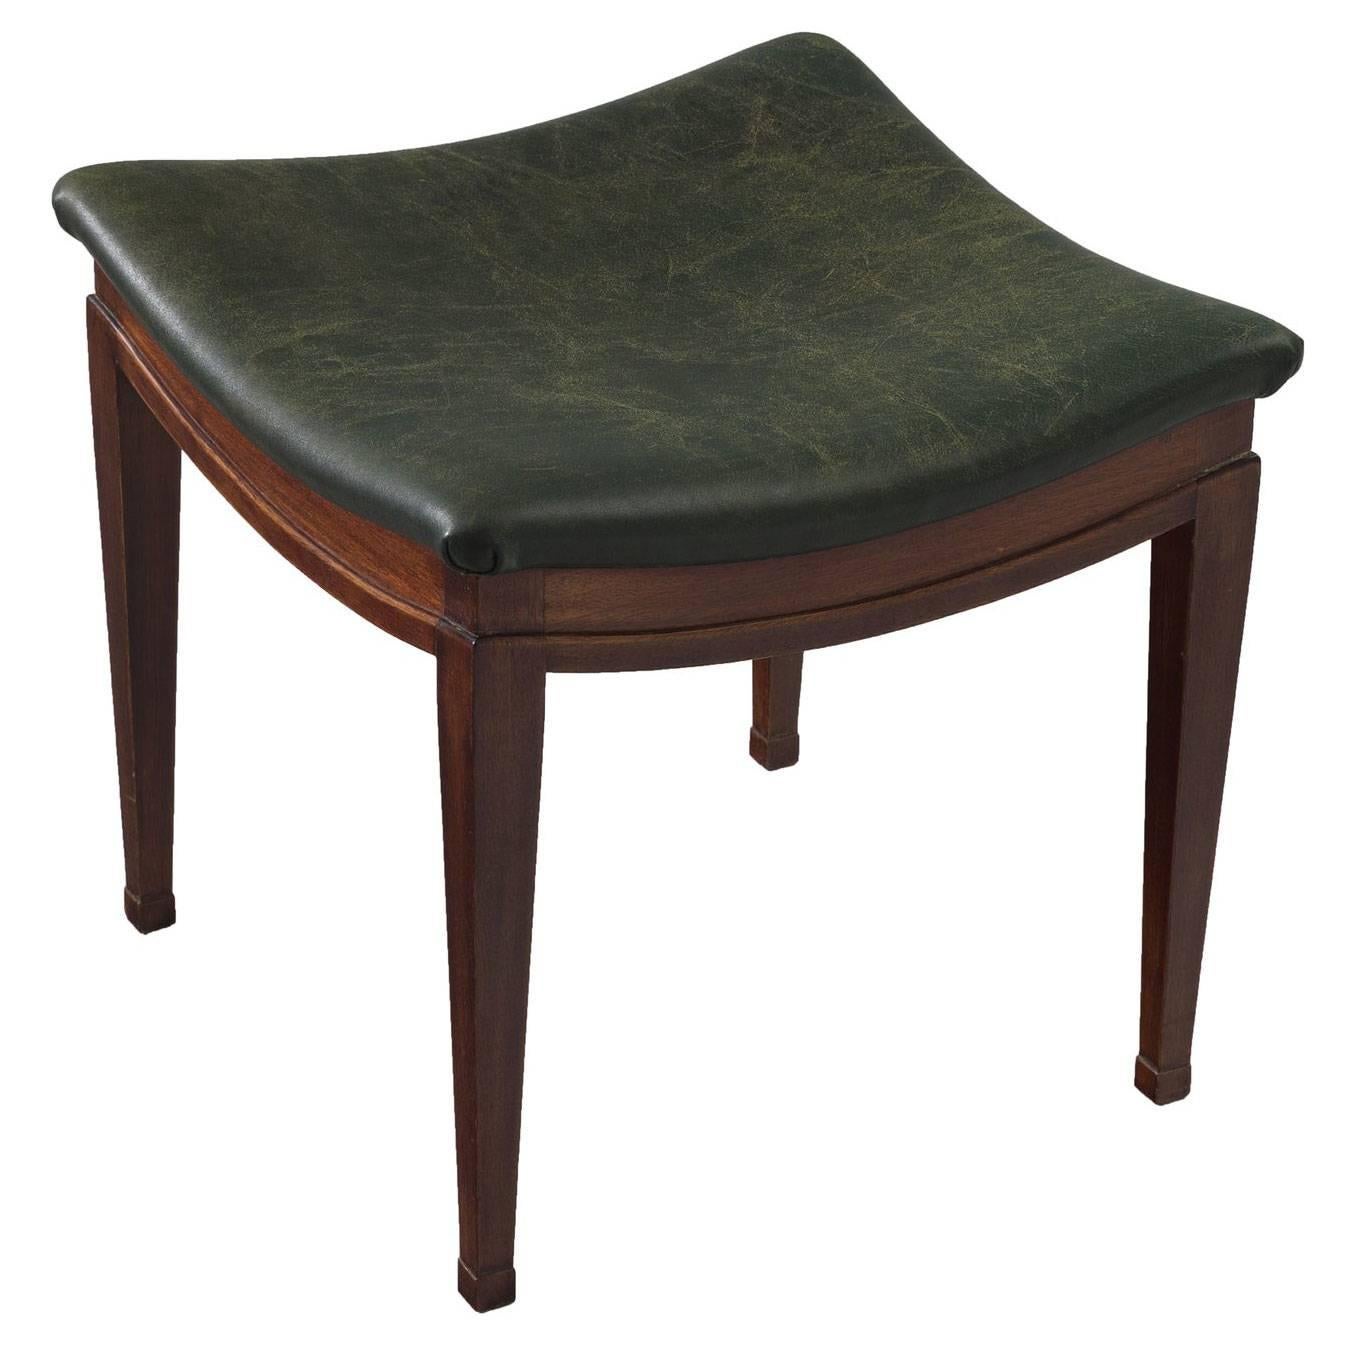 Frits Henningsen Stool in Mahogany and Patinated Leather